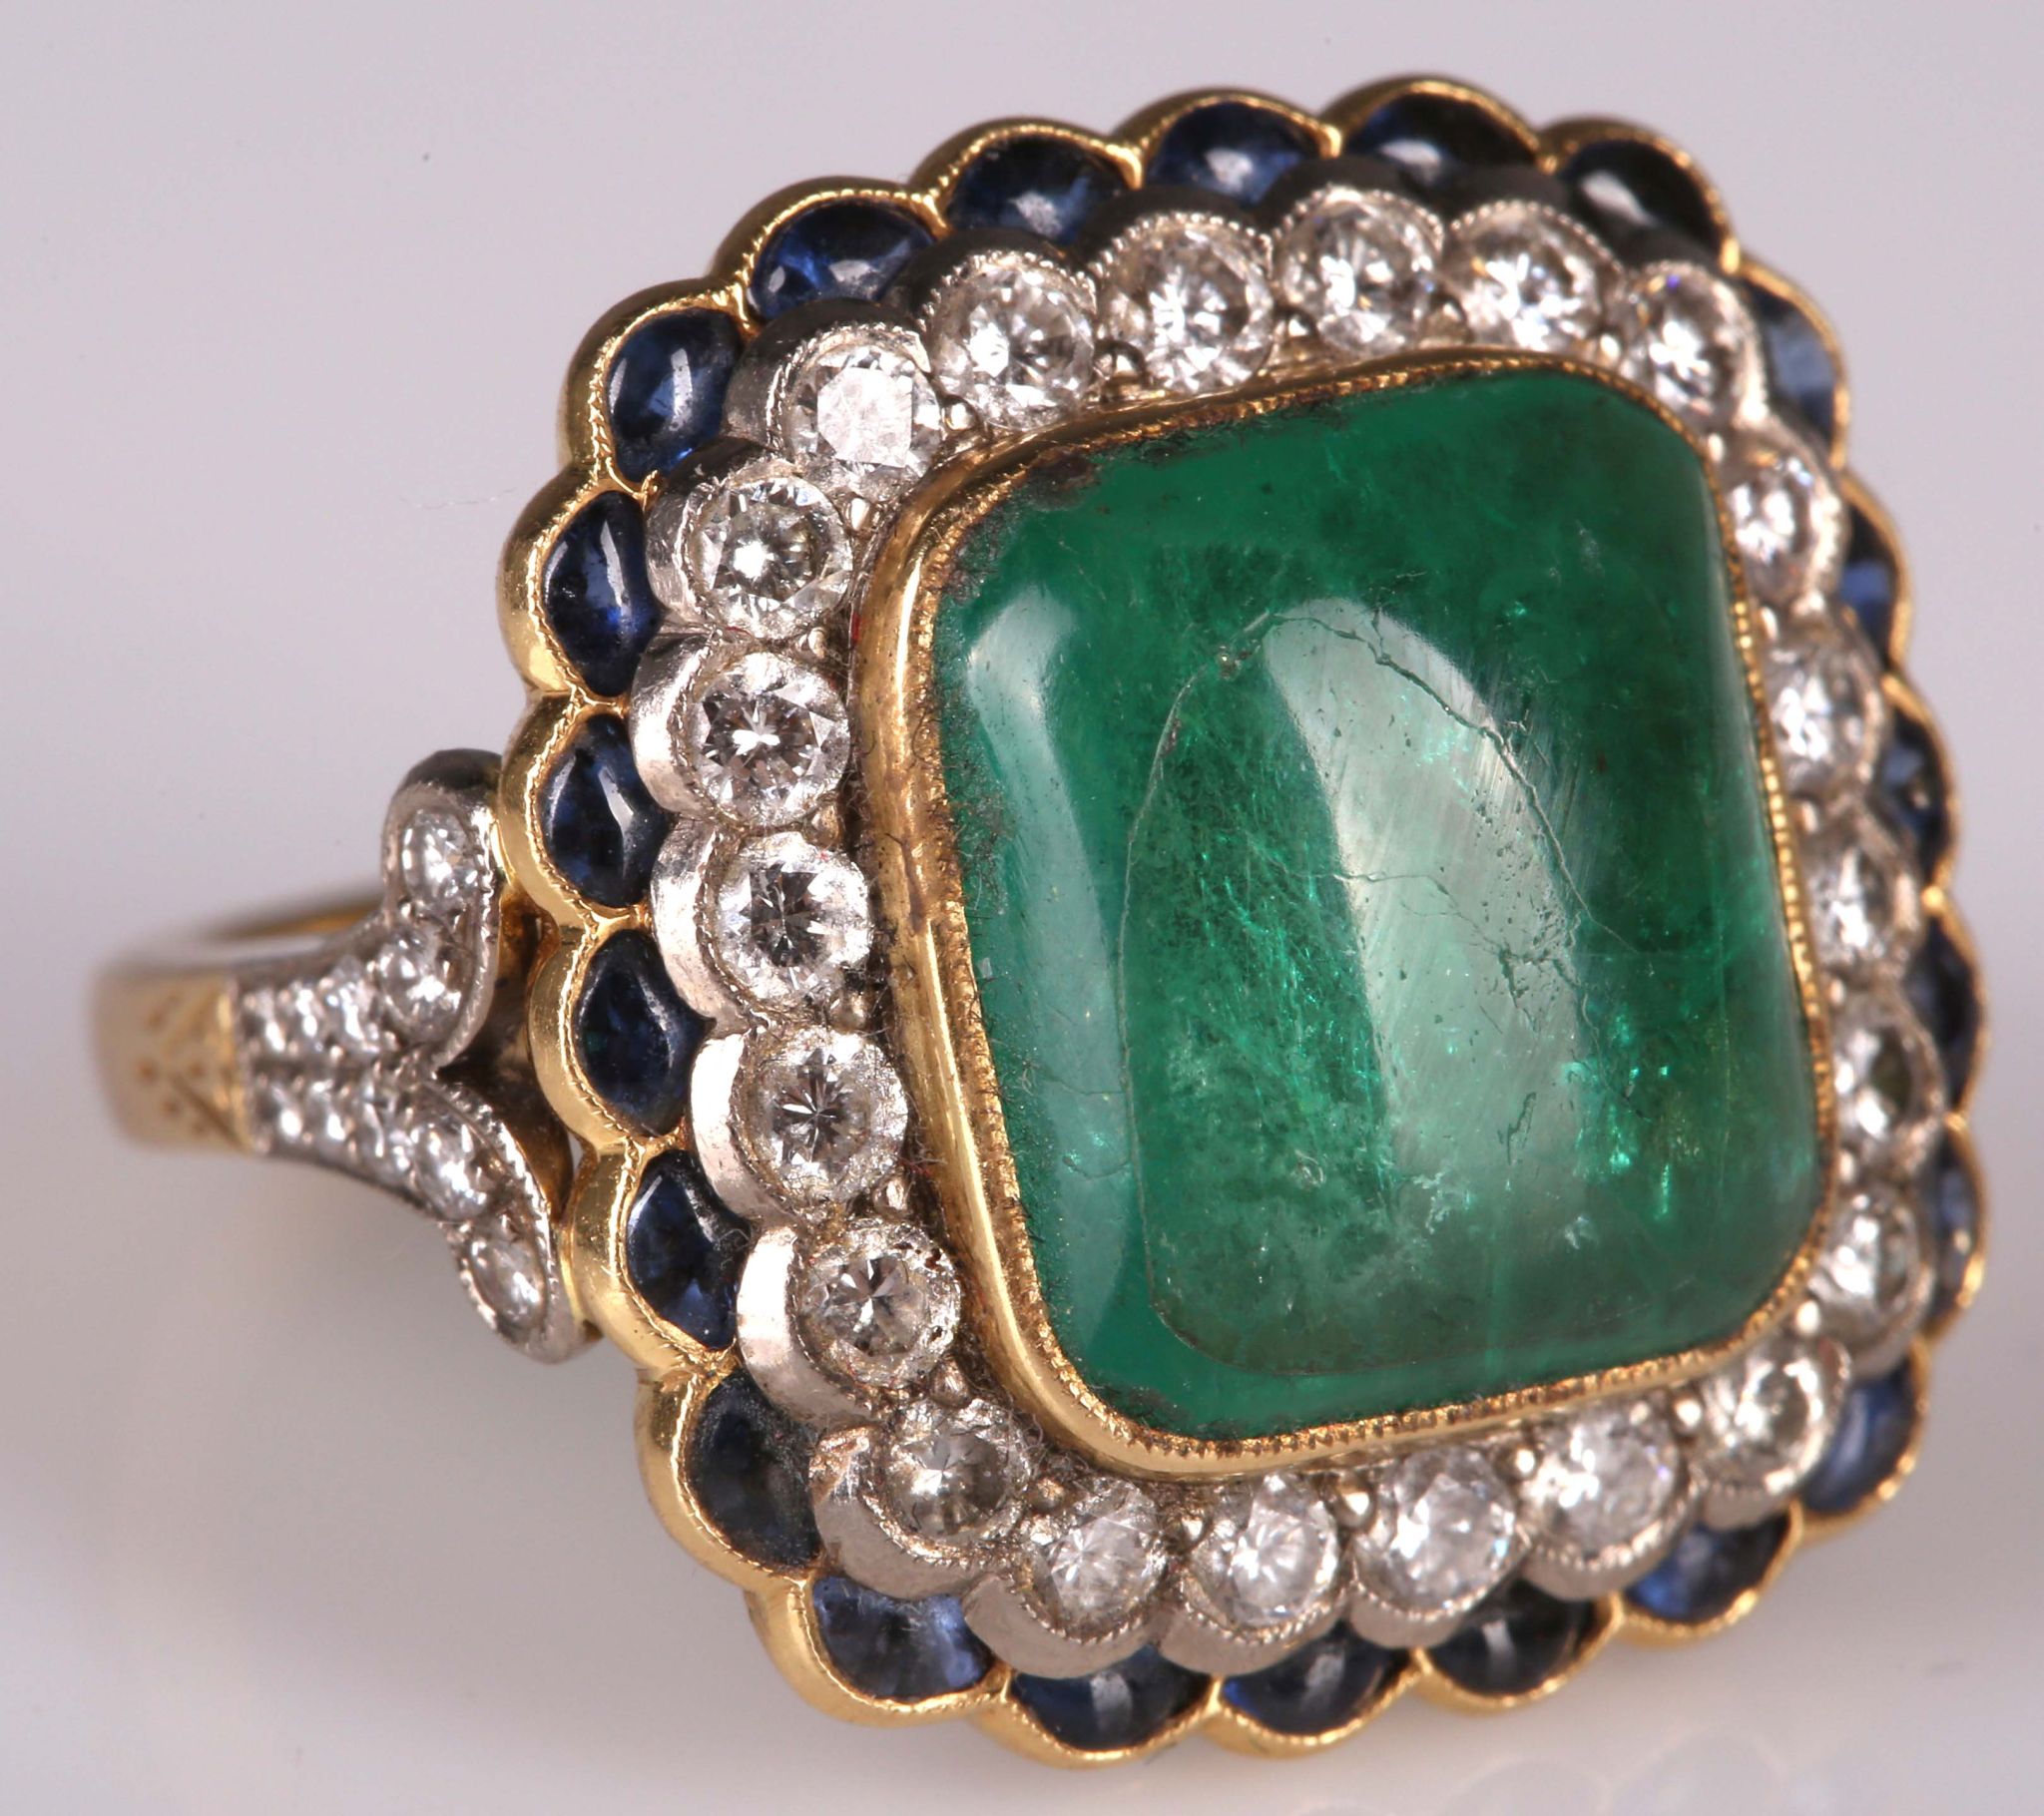 An impressive 18ct gold, cabouchon emerald, diamond and sapphire set dress ring, the large emerald